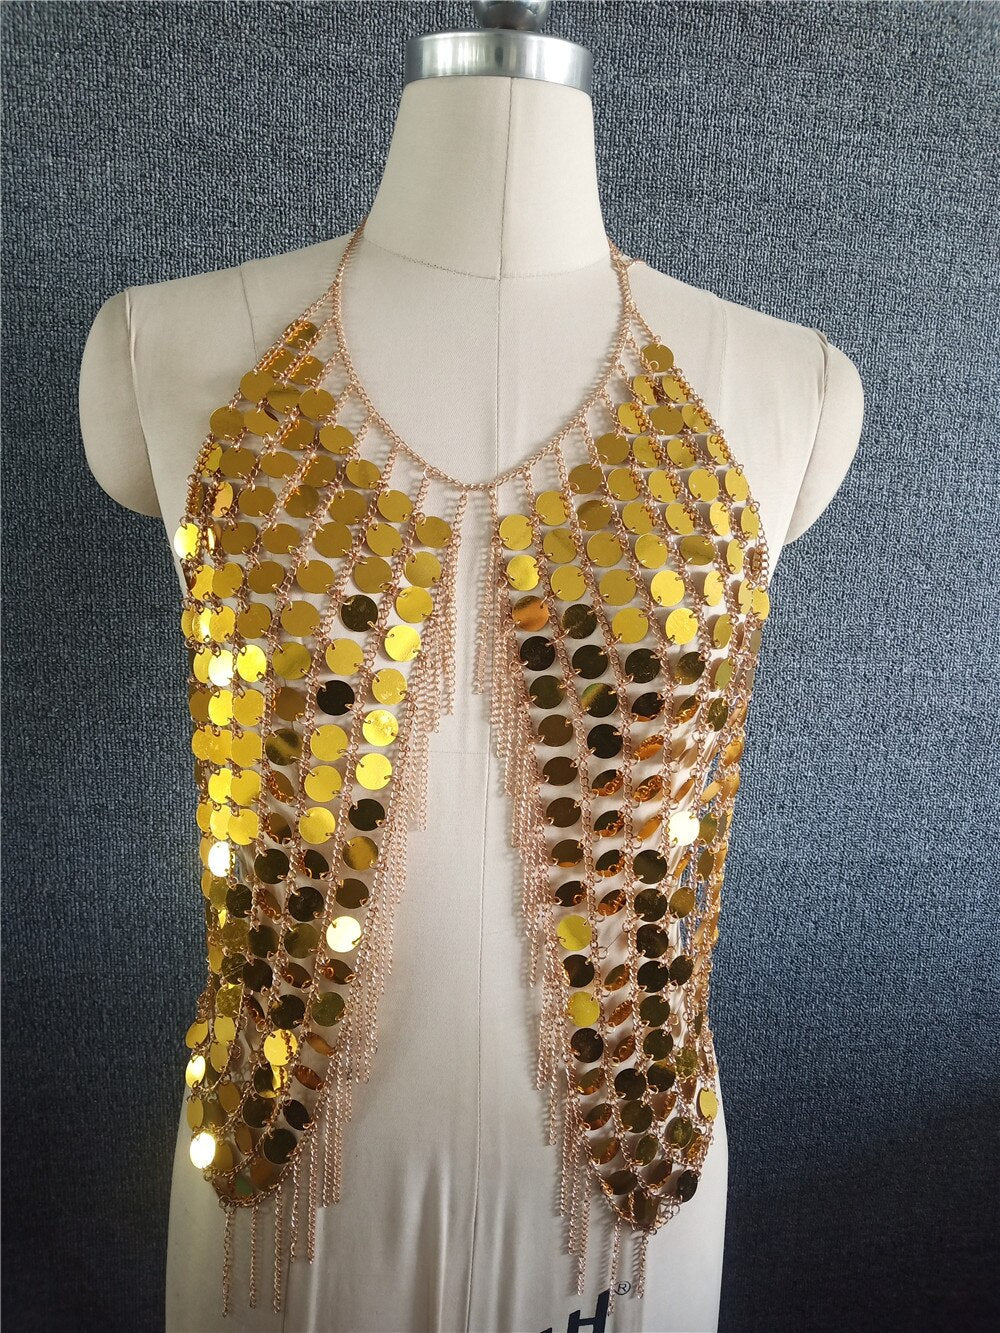 Bling Sequined Crop Tops Sexy Magnificent Metal Sequins Tassel Harness Punk Necklace Bra Chain Dance Wear Tank Top